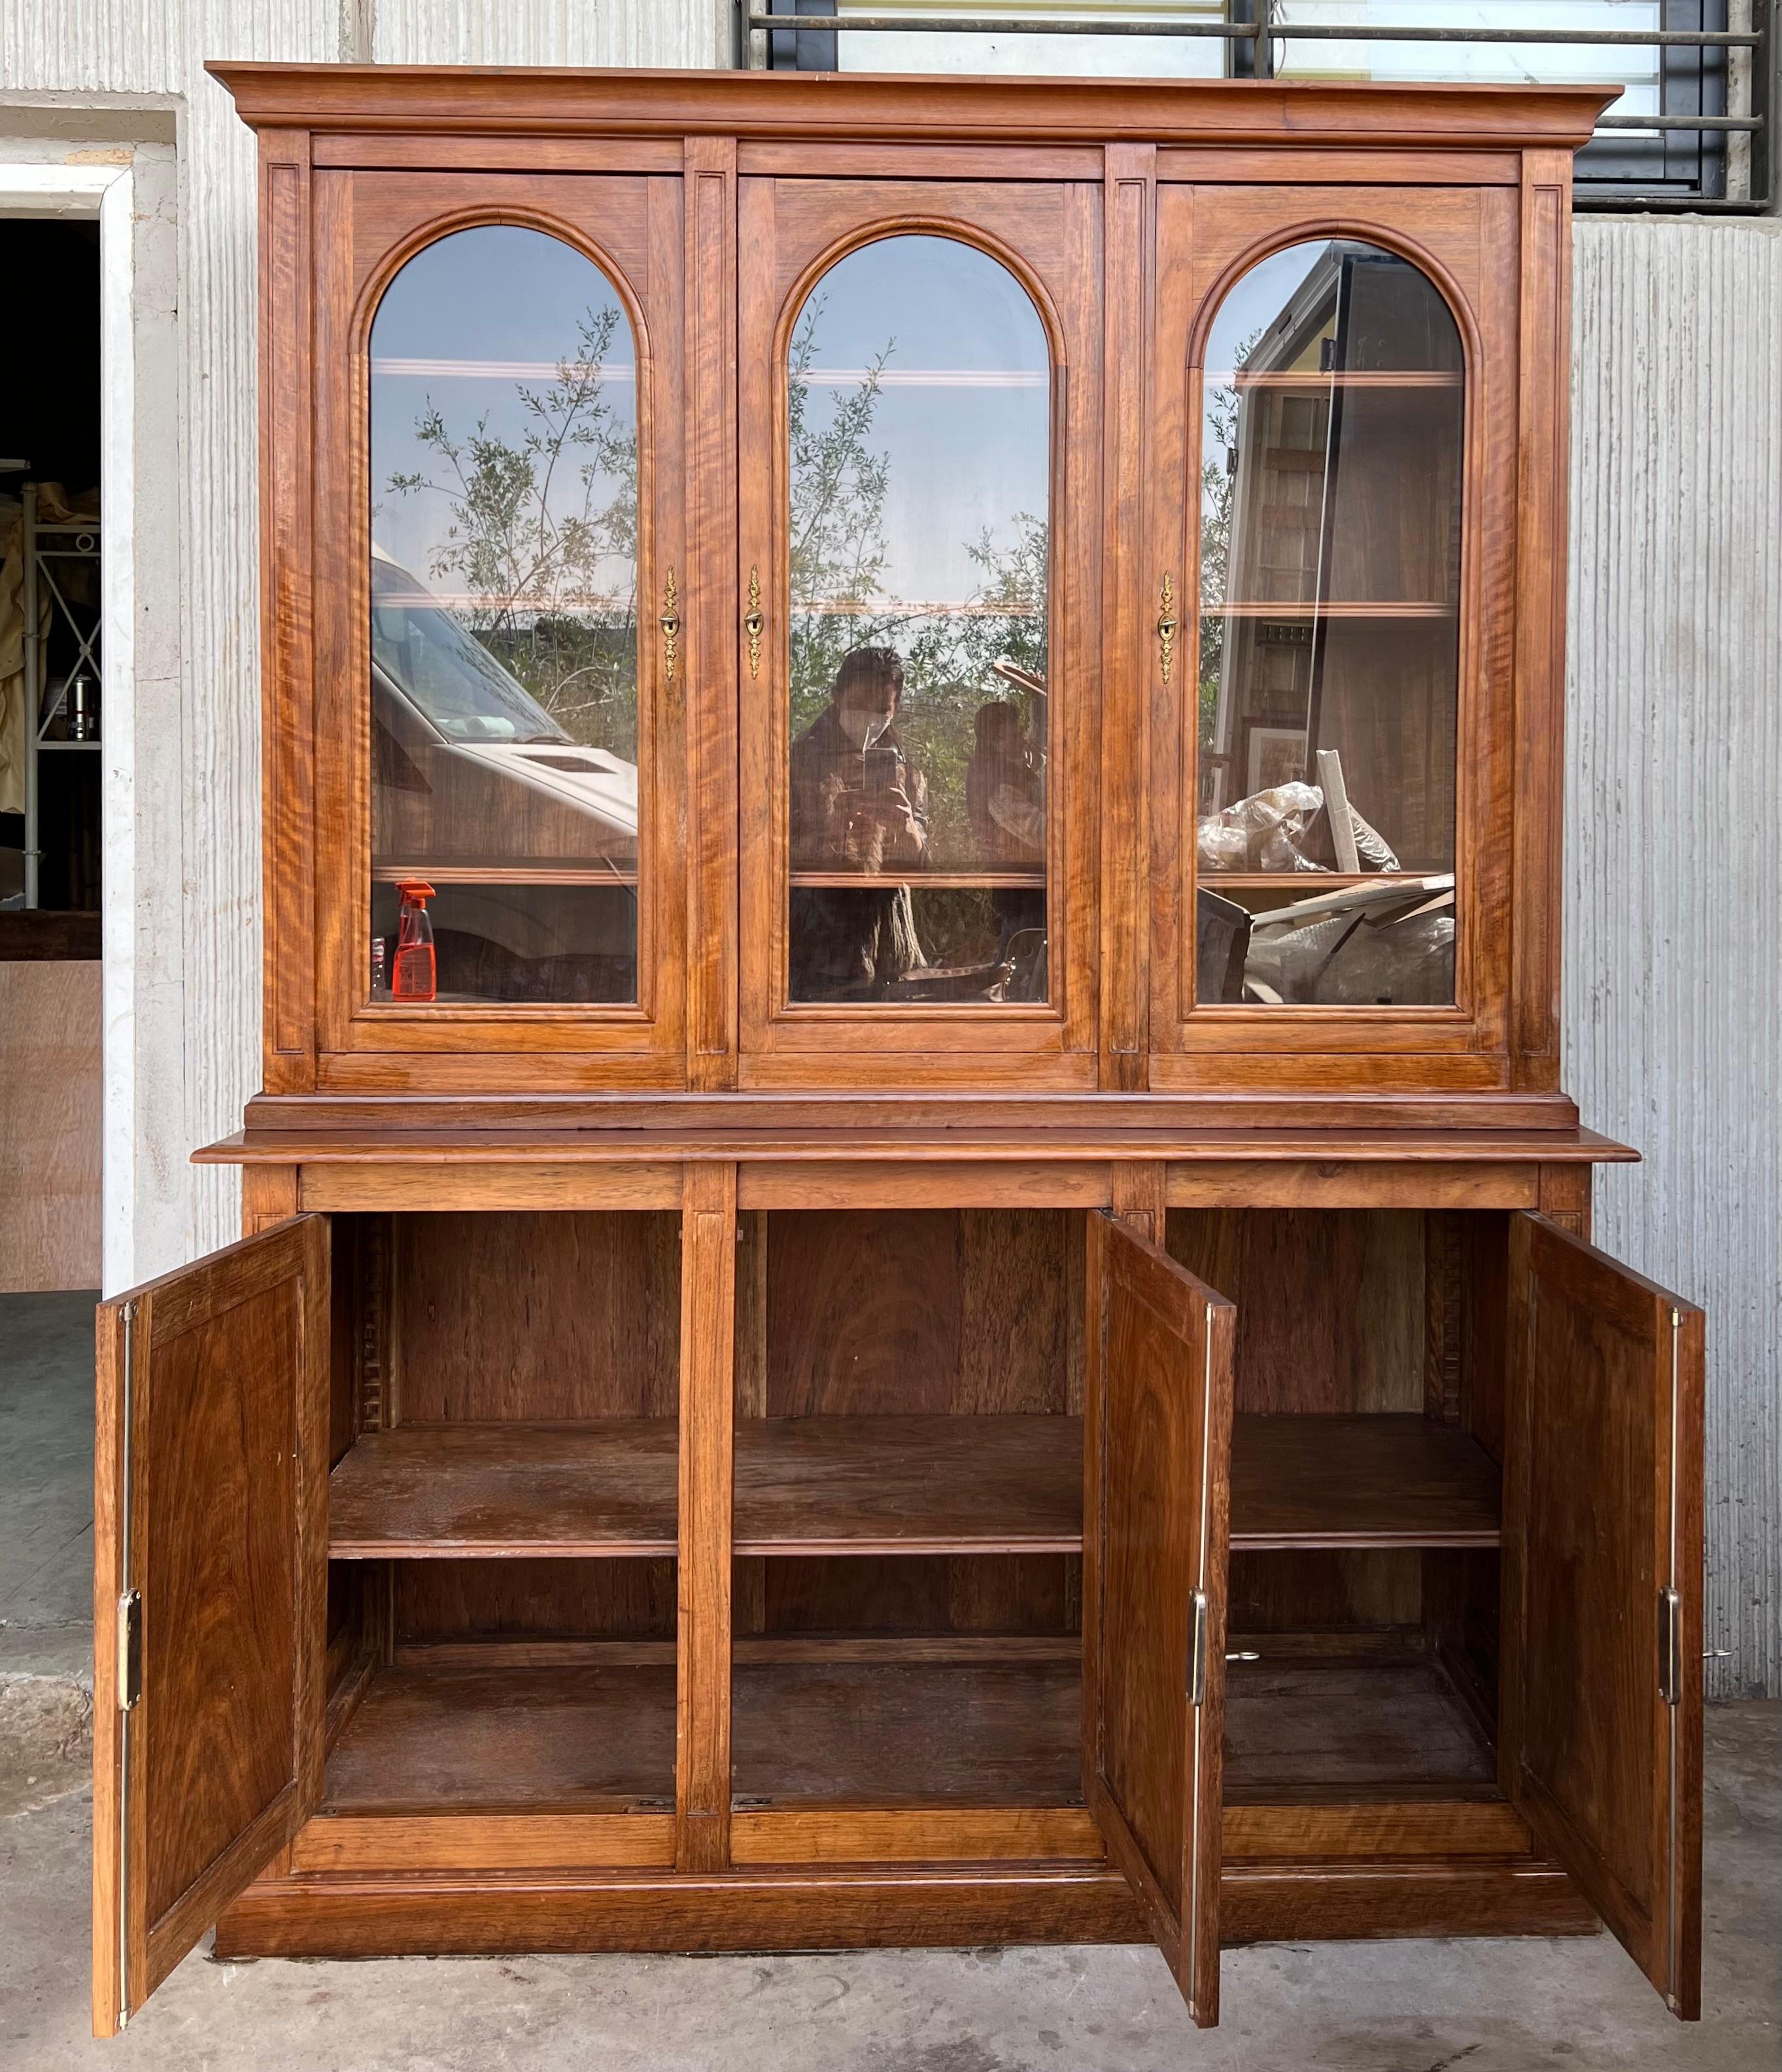 Spanish Colonial Early 20th Bookcase or Vitrine in Spanish Pine with Three Arch Glass Doors For Sale